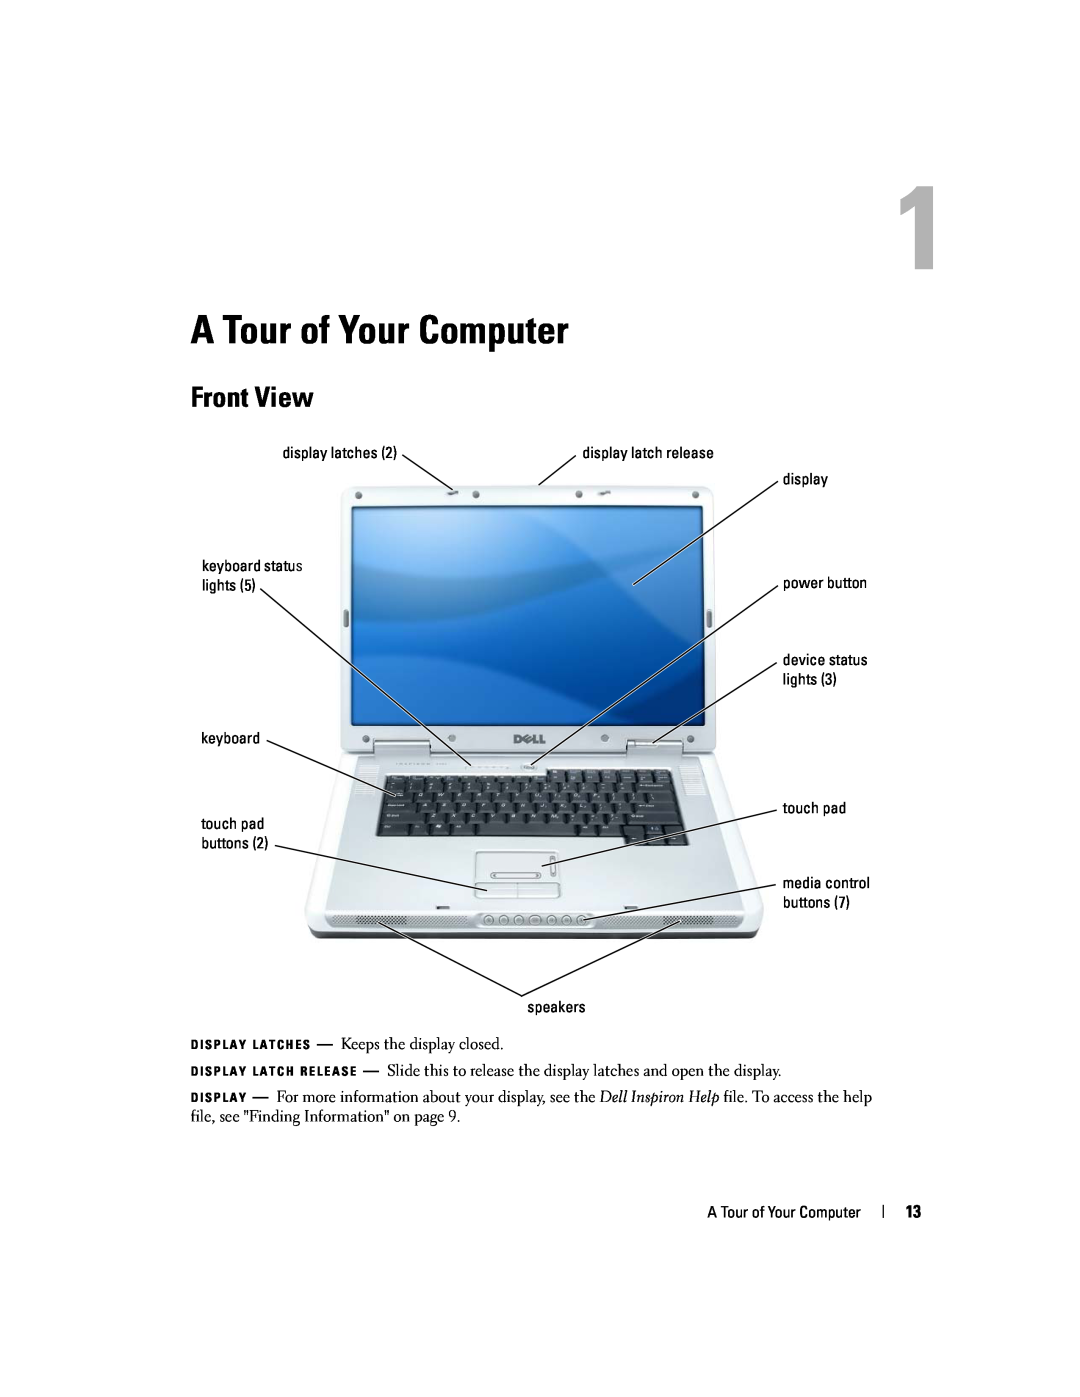 Dell 9300 owner manual A Tour of Your Computer, Front View 